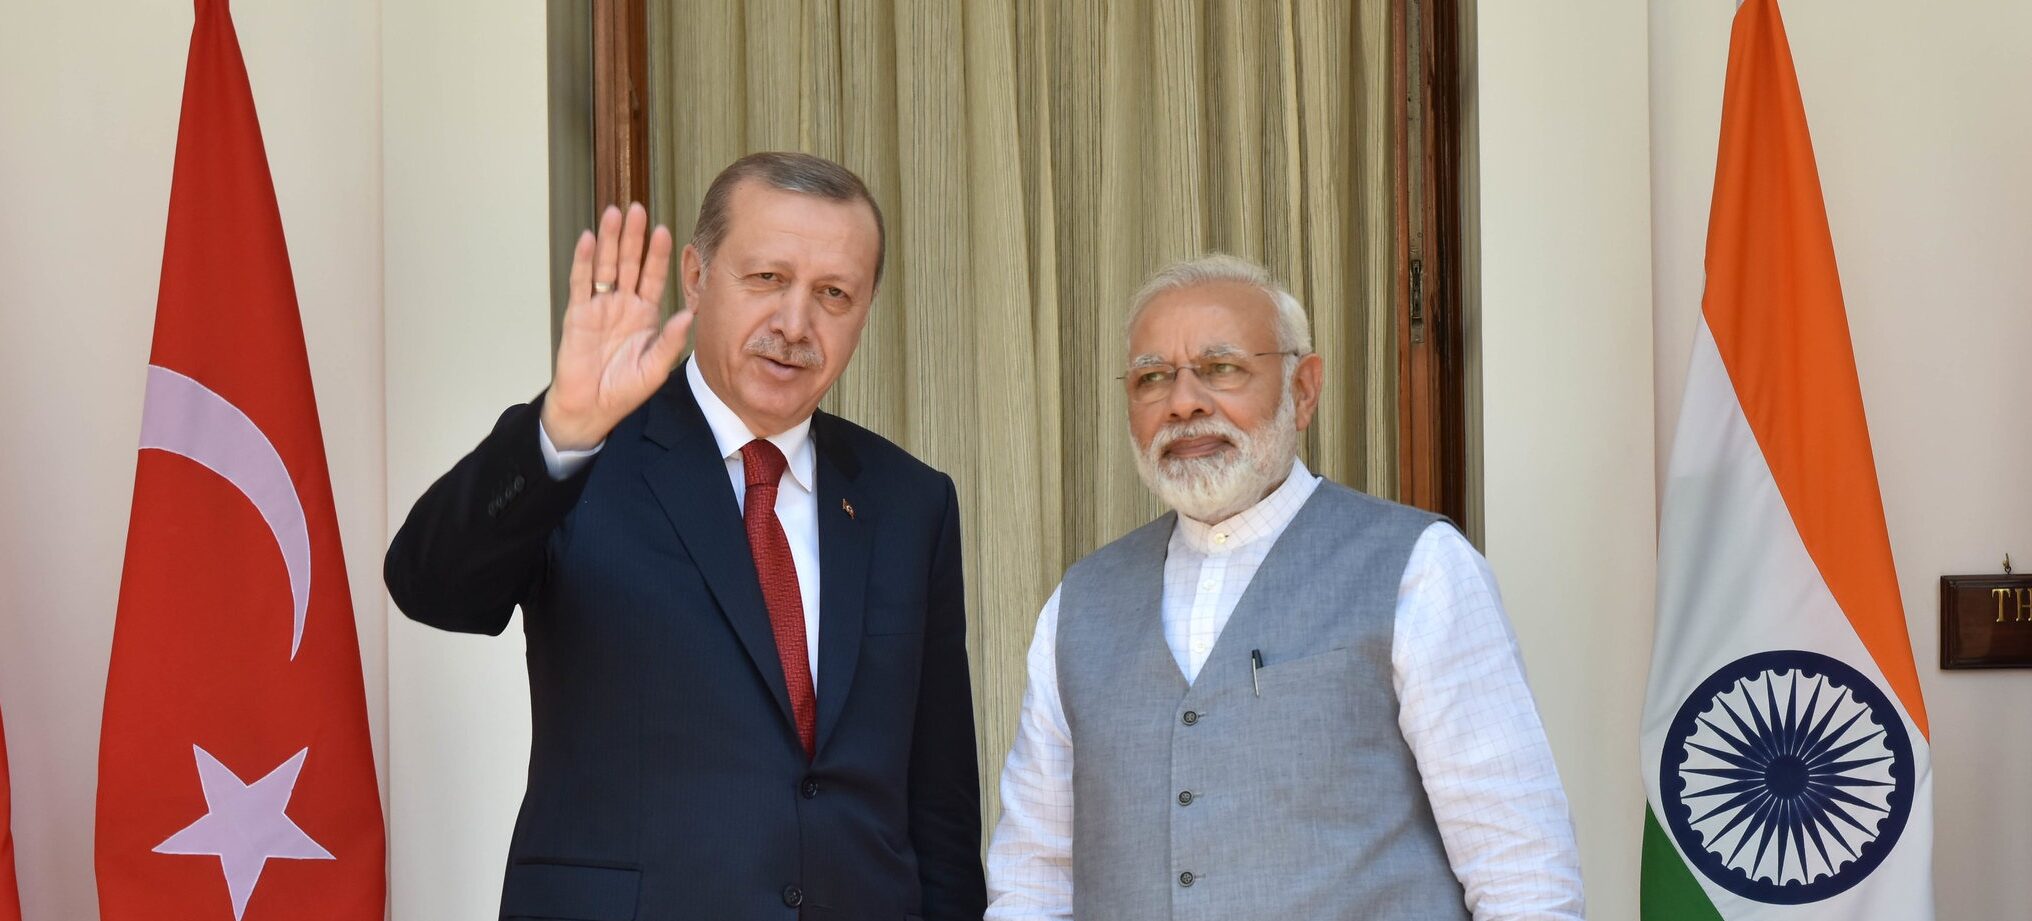 What the rise of pan-Turkism means for India